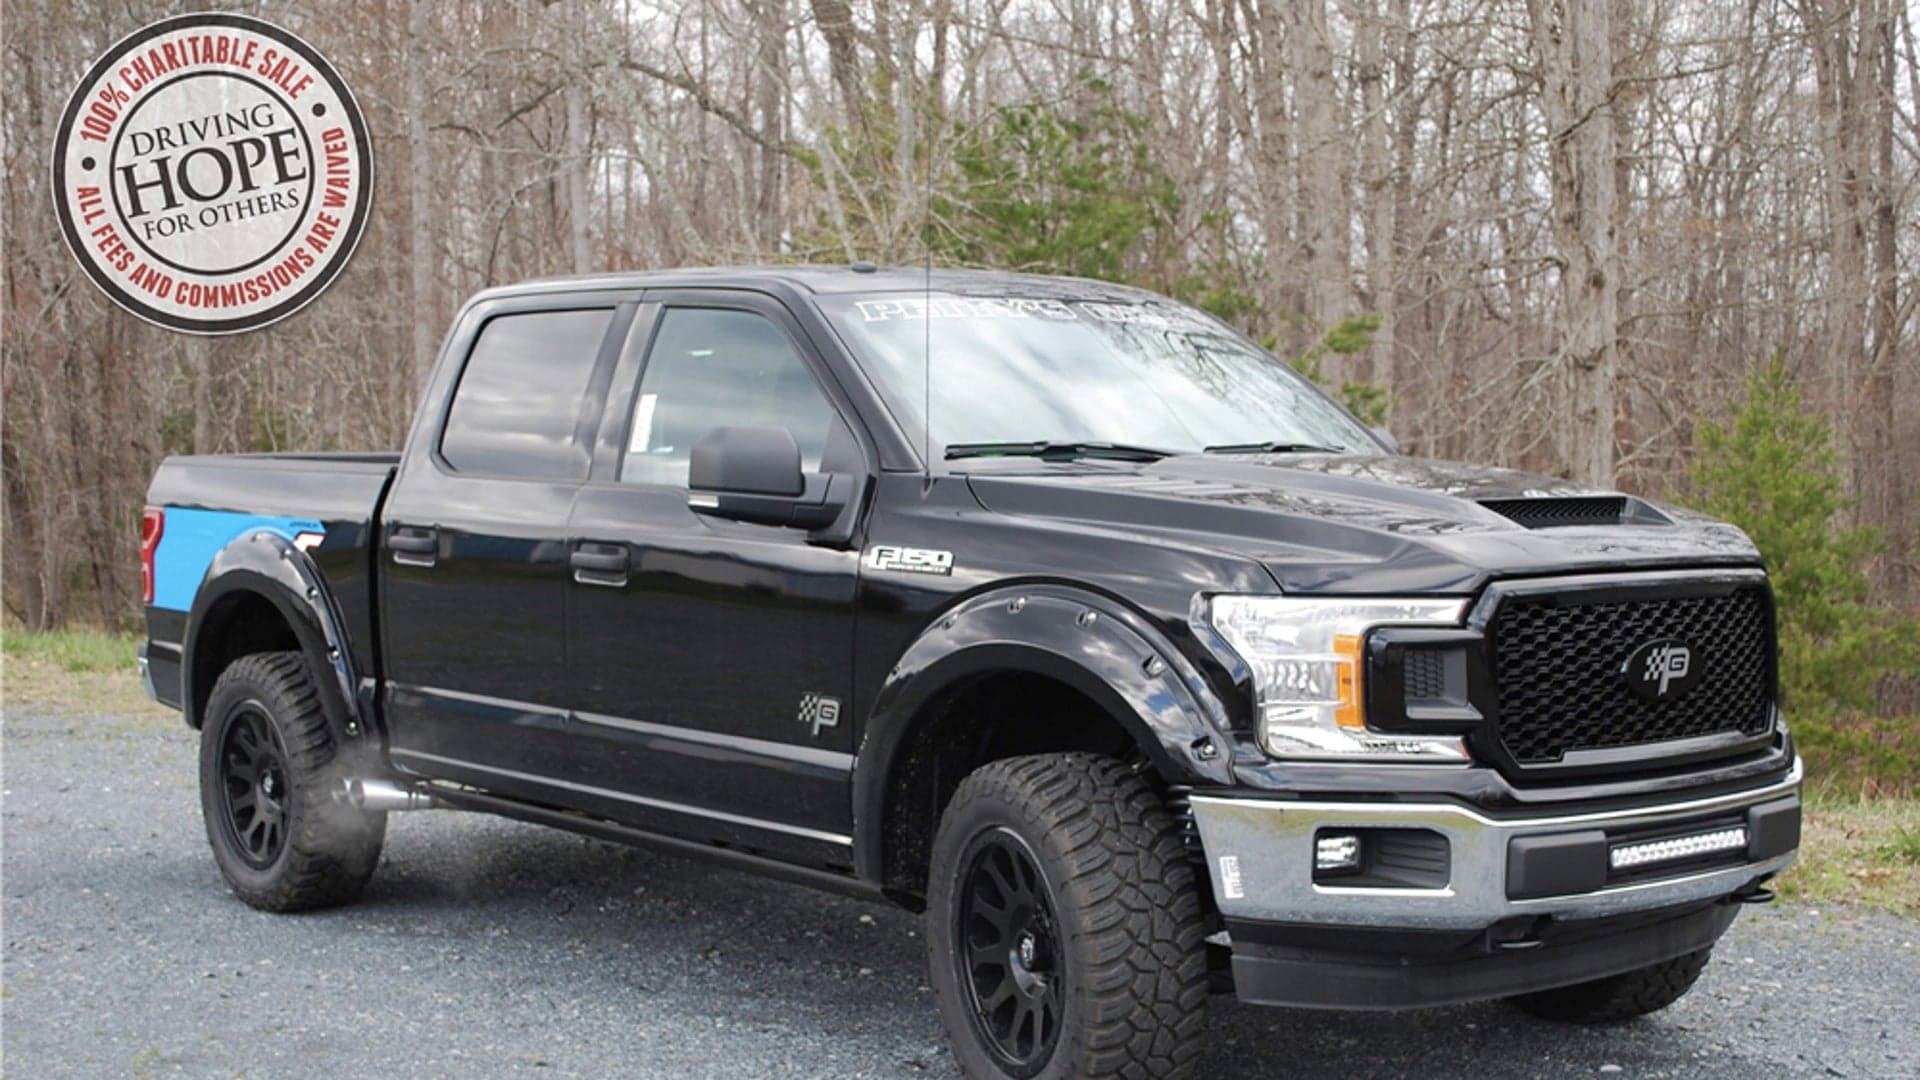 Richard Petty Is Auctioning a 750-HP Ford F-150 ‘Warrior Edition’ for Disabled Veterans